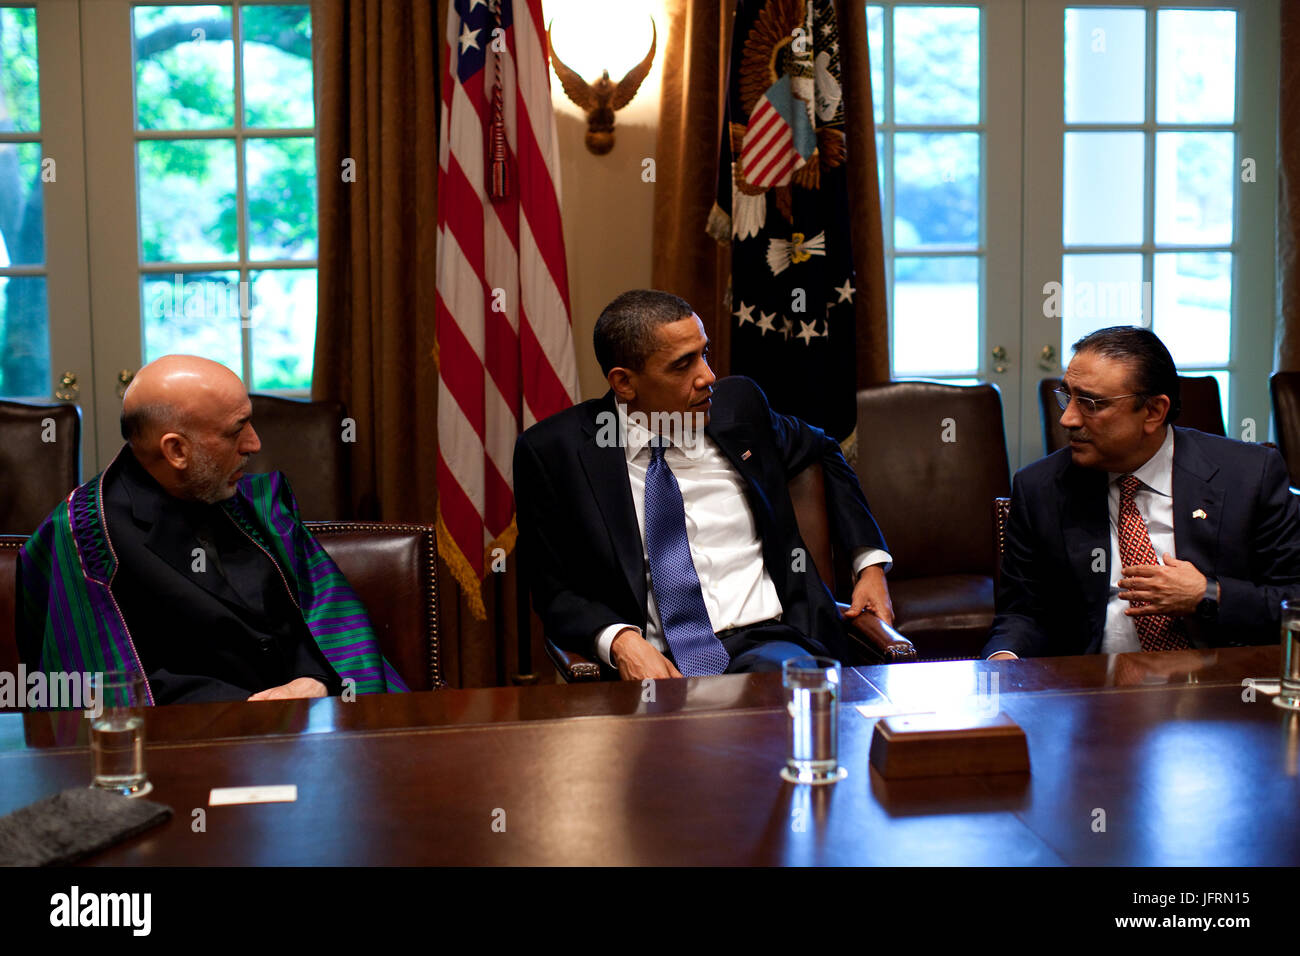 President Barack Obama (center) with Afghan President Karzai and Pakistan President Zardari during a US-Afghan-PakistanTrilateral meeting in Cabinet Room  May 6, 2009. Official White House Photo by Pete Souza Stock Photo